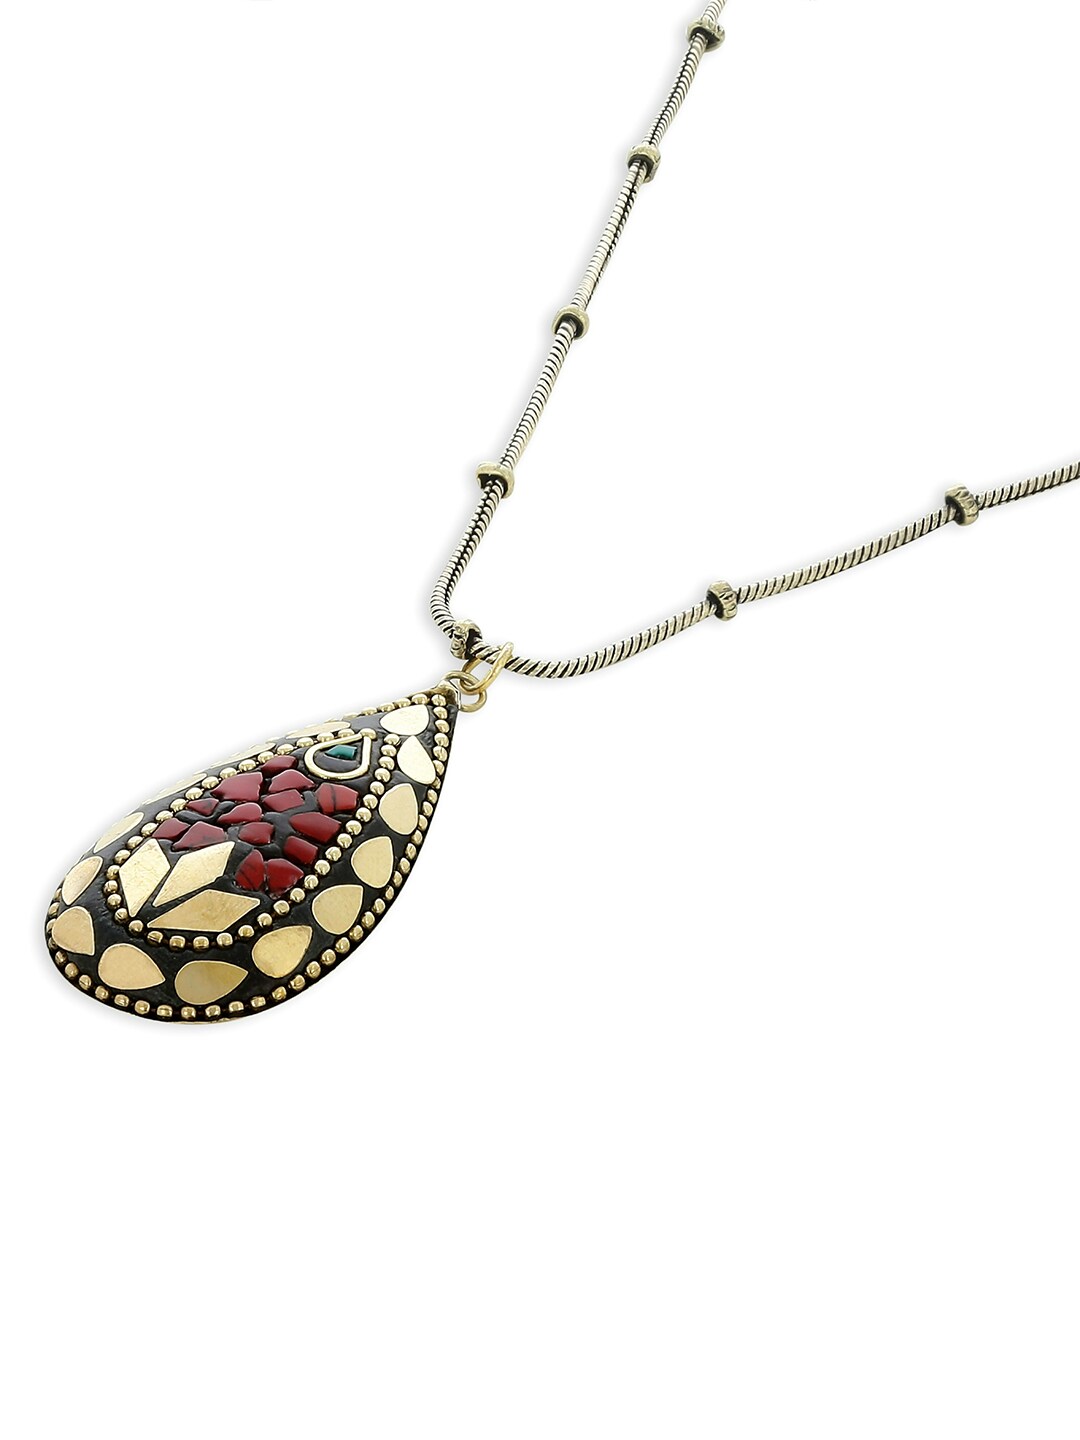 EL REGALO Women Red & Gold Tribal Necklace - for Women and Girls
Style ID: 17119270